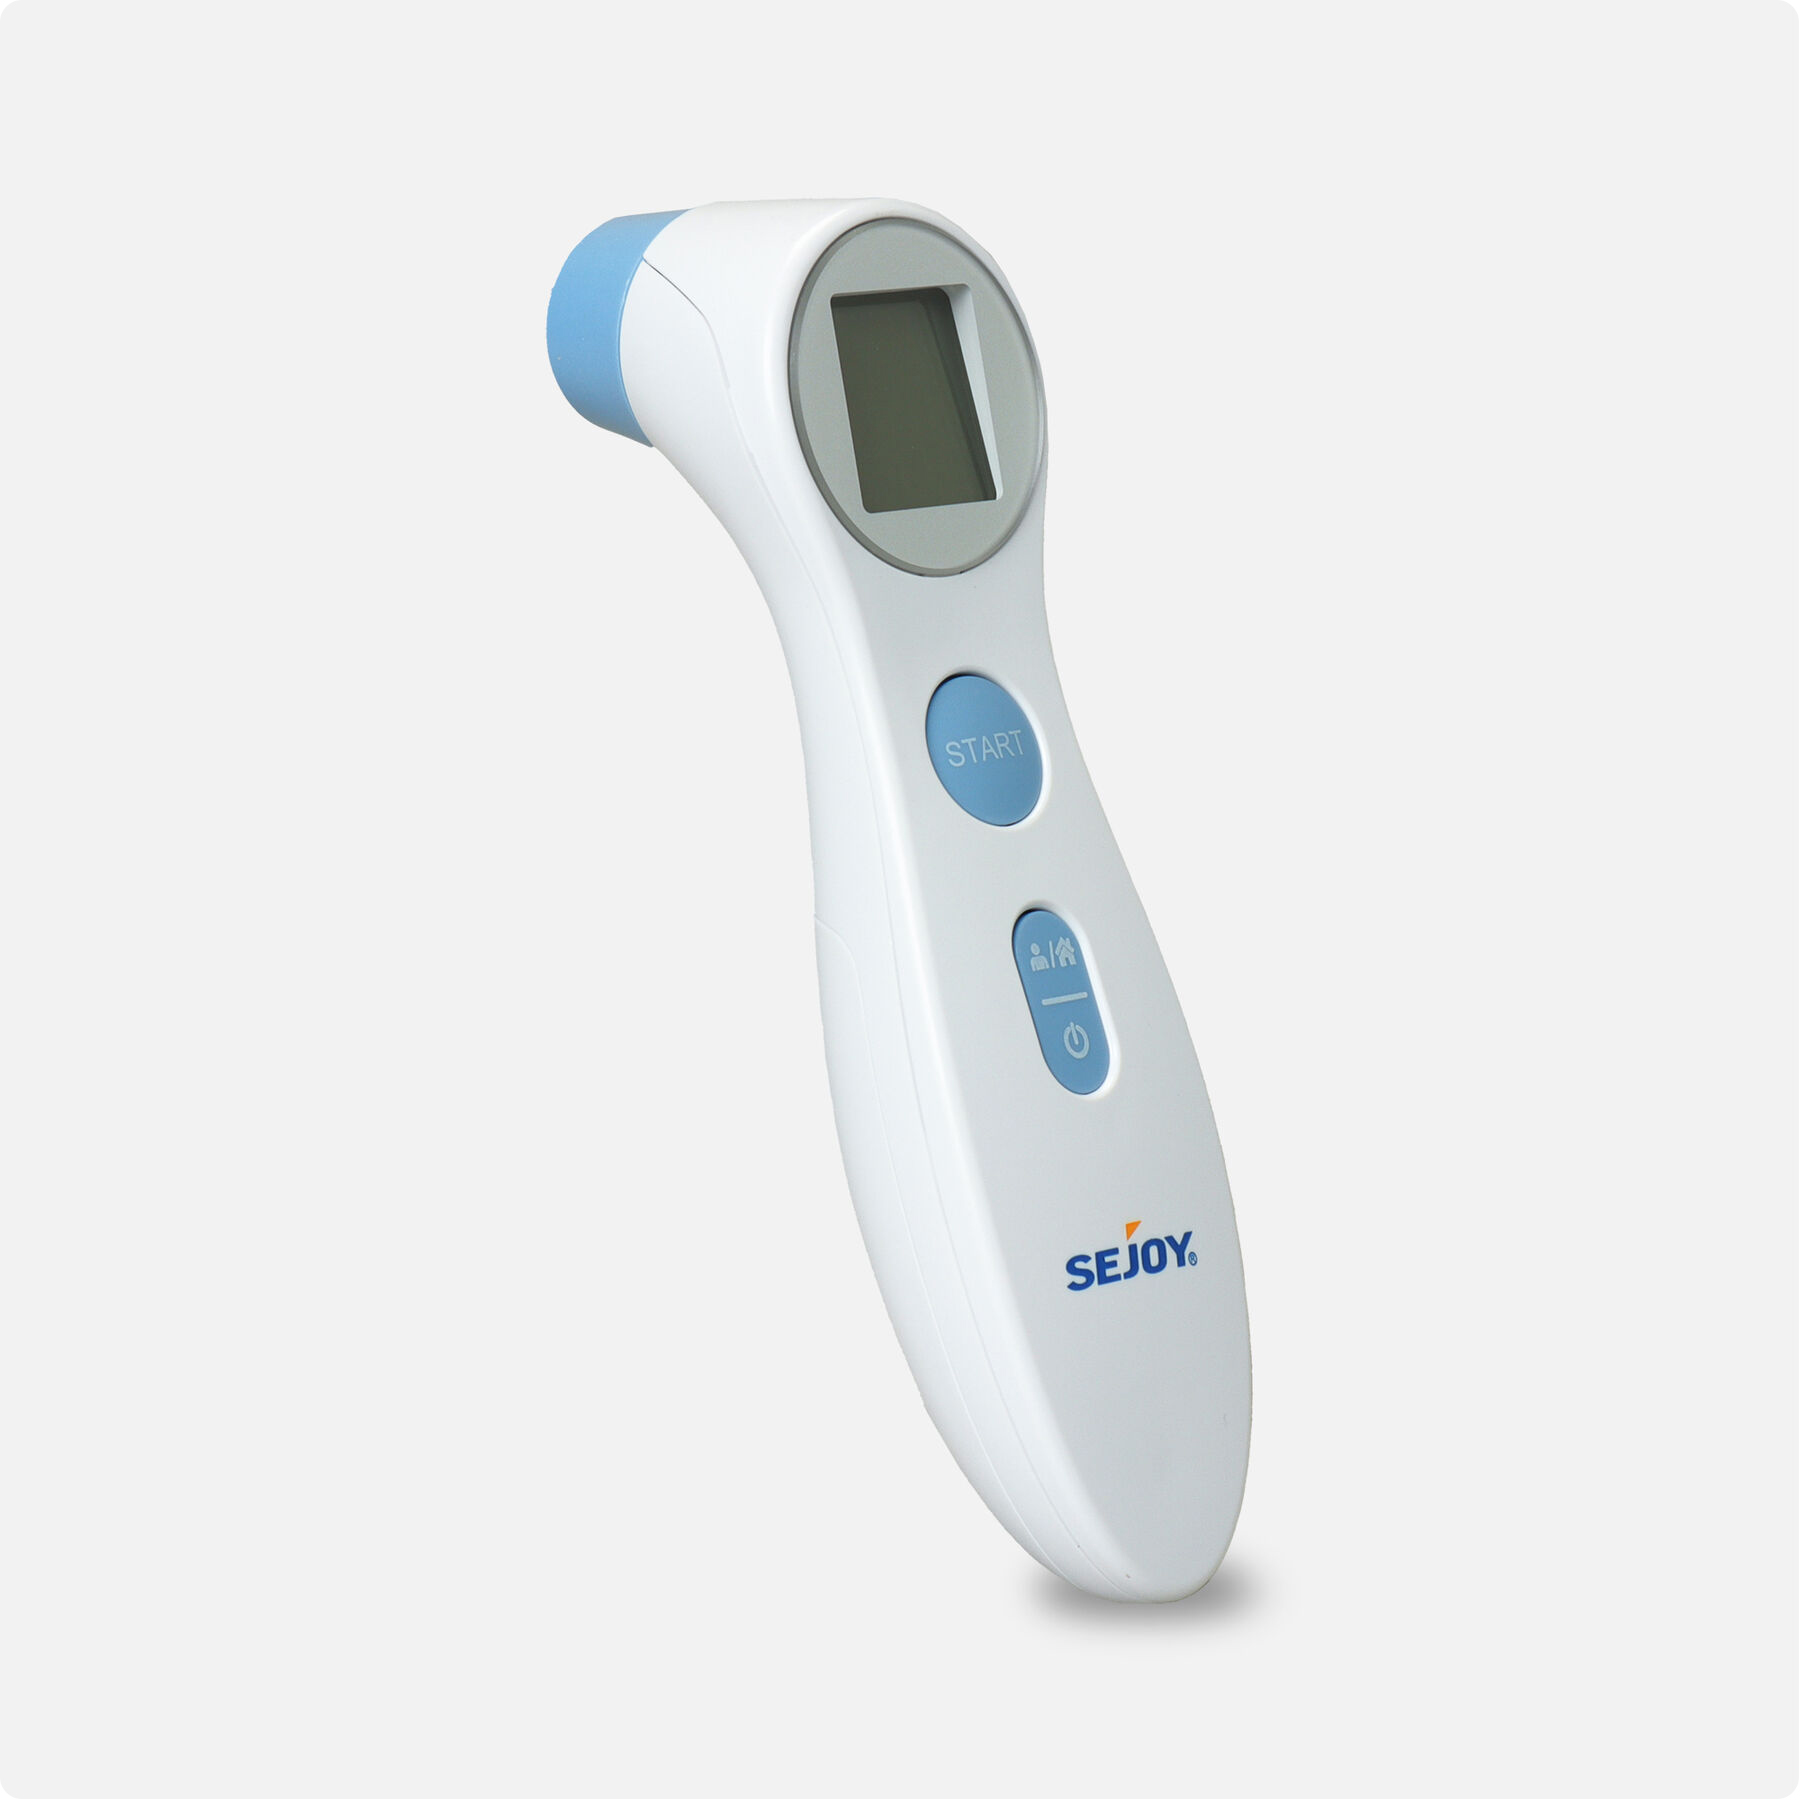 FSA/HSA Eligible Thermometers in FSA/HSA Eligible Home Health Care 